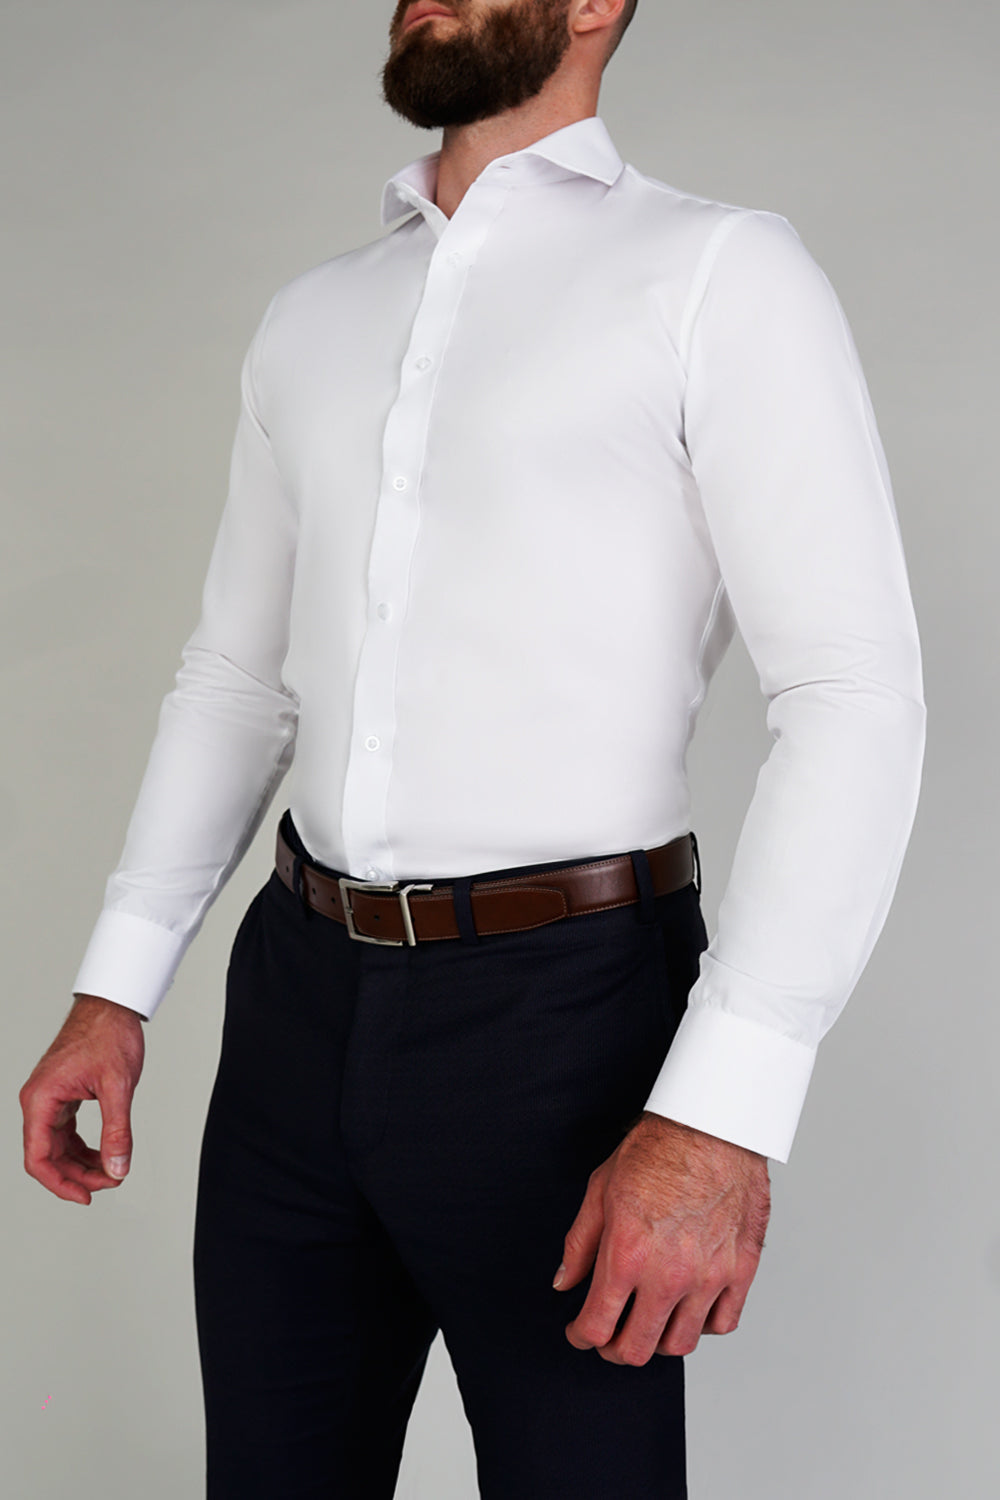 The 'Daily' Dress Shirt - Solid White